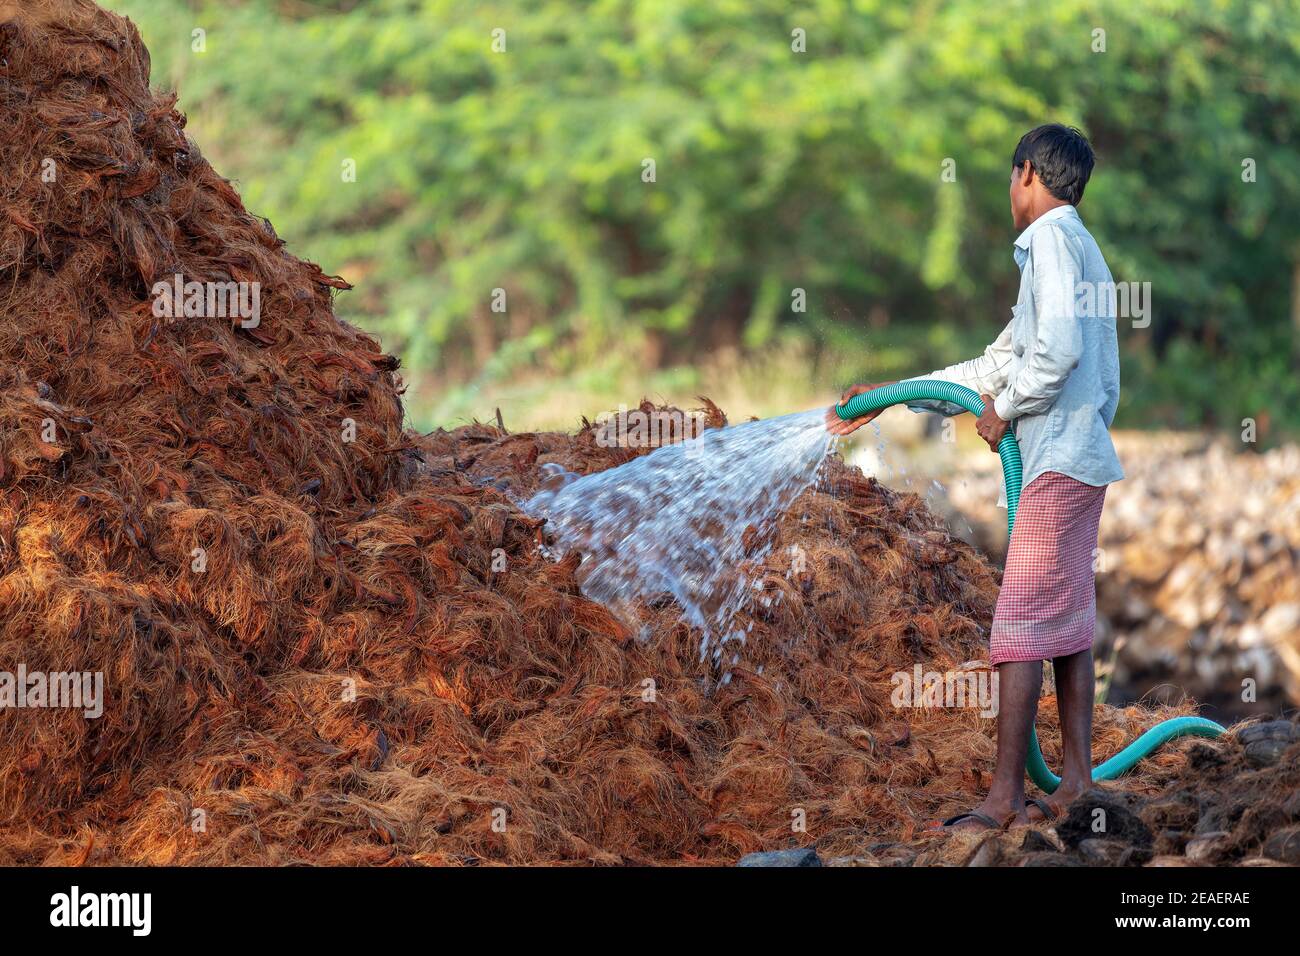 indian farmer watering coconut husk to make coir rope which is made from natural fiber which is extracted from outer husk of coconut Stock Photo